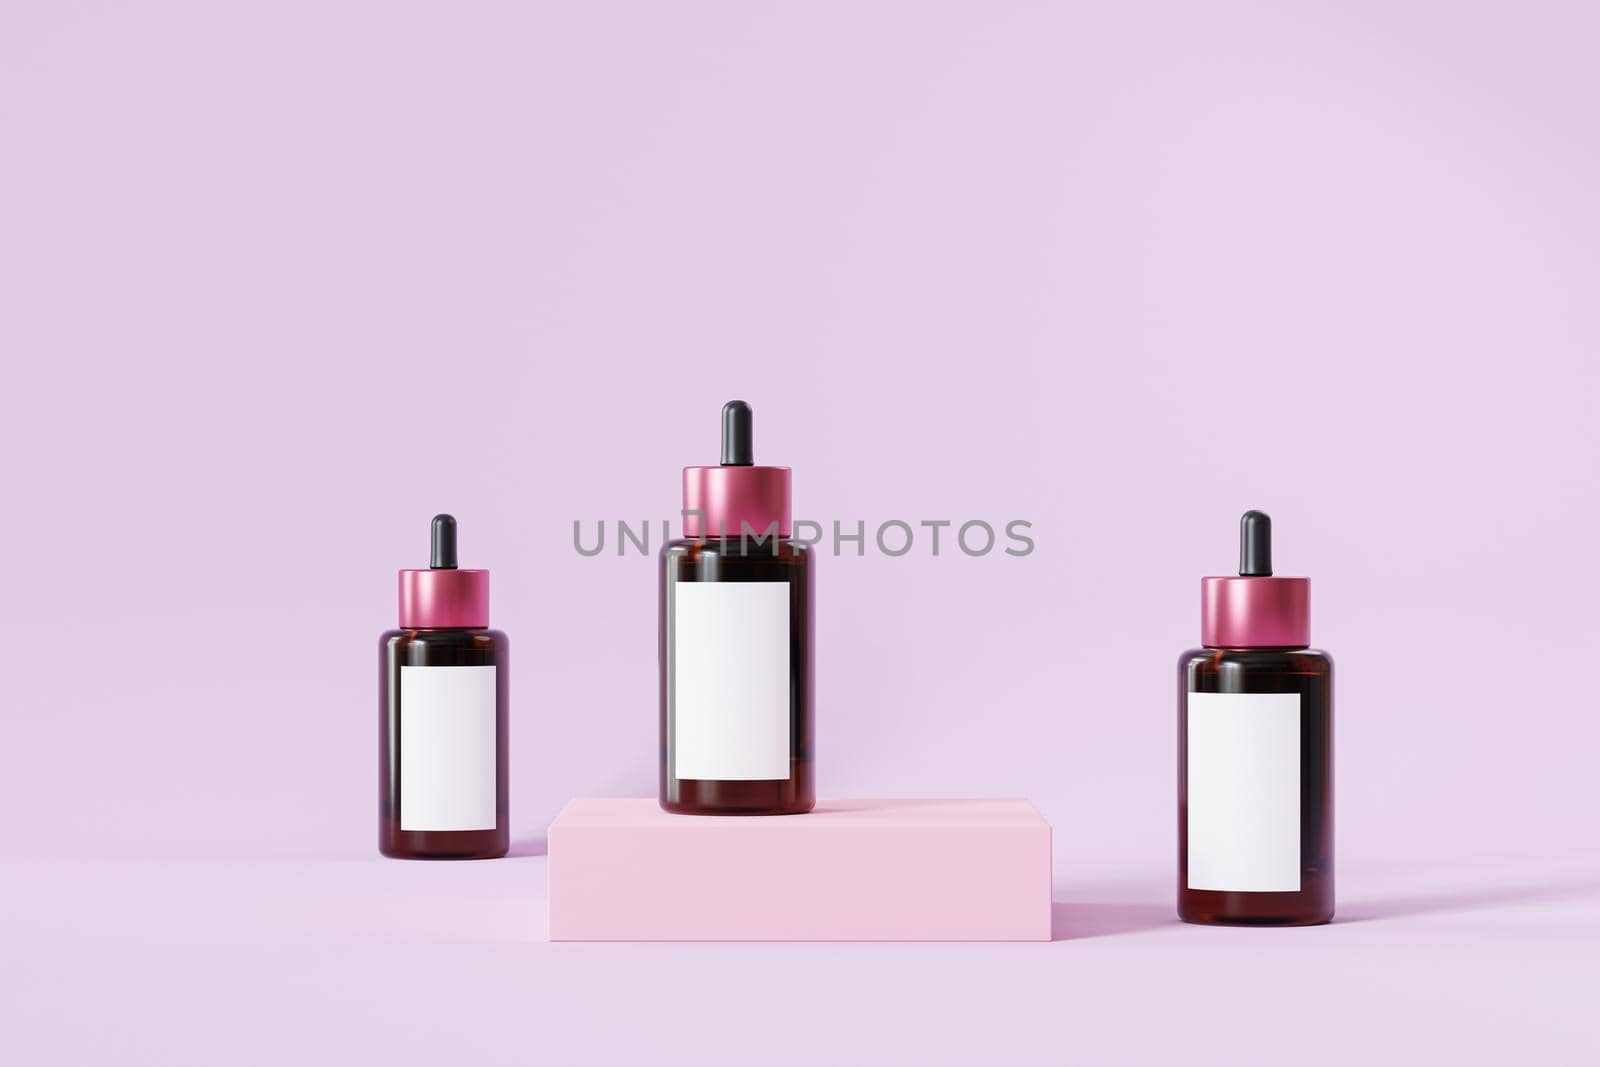 Mockup bottles with label for cosmetics products, template or advertising, pink background, 3d illustration render